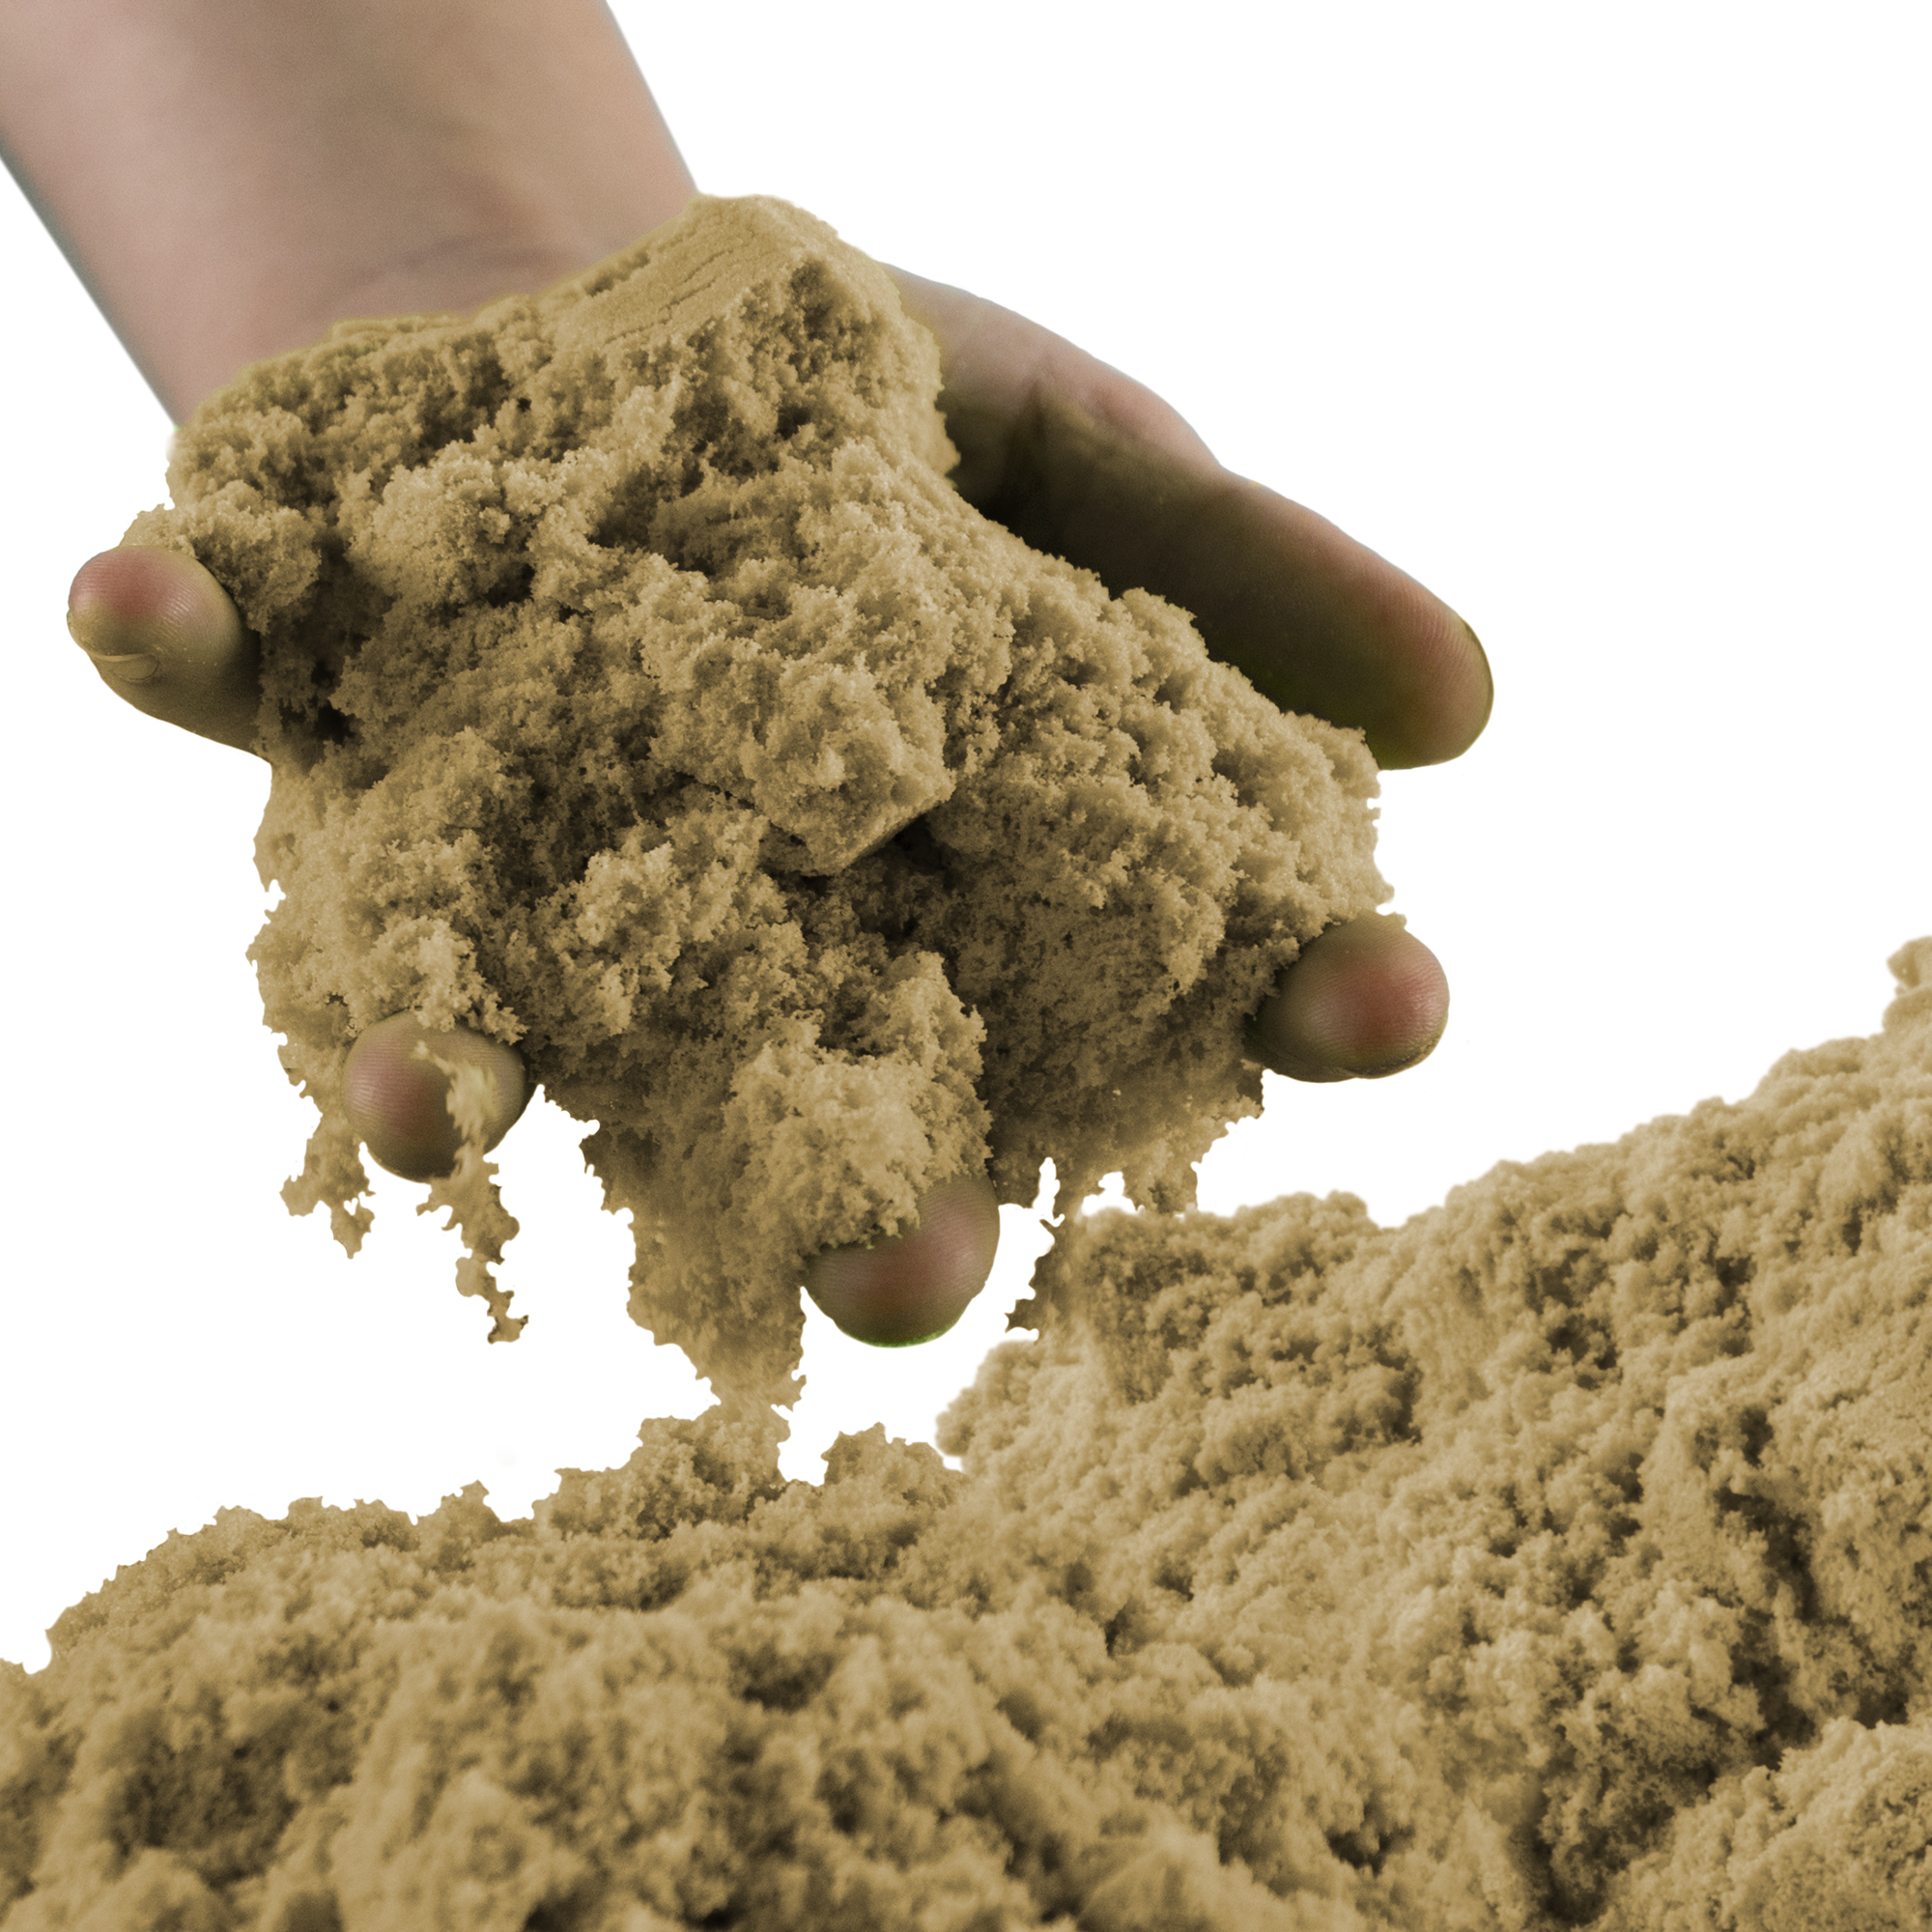 National Geographic Play Sand - 6 lbs of Sand with Castle Molds (Natural Sand color) - A Fun Sensory Sand Activity - image 5 of 7